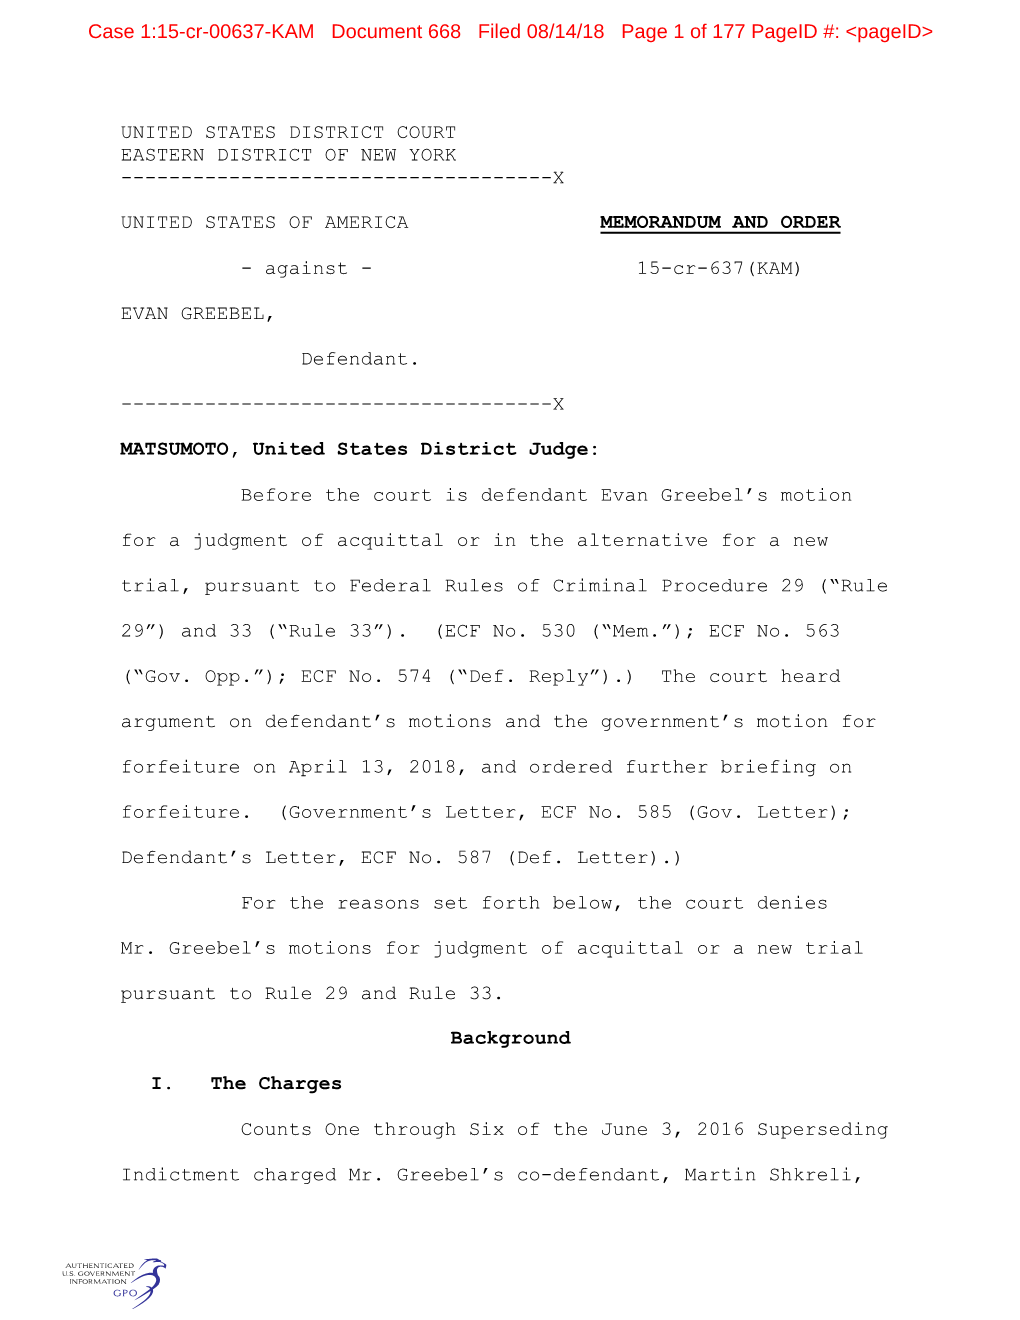 Case 1:15-Cr-00637-KAM Document 668 Filed 08/14/18 Page 1 of 177